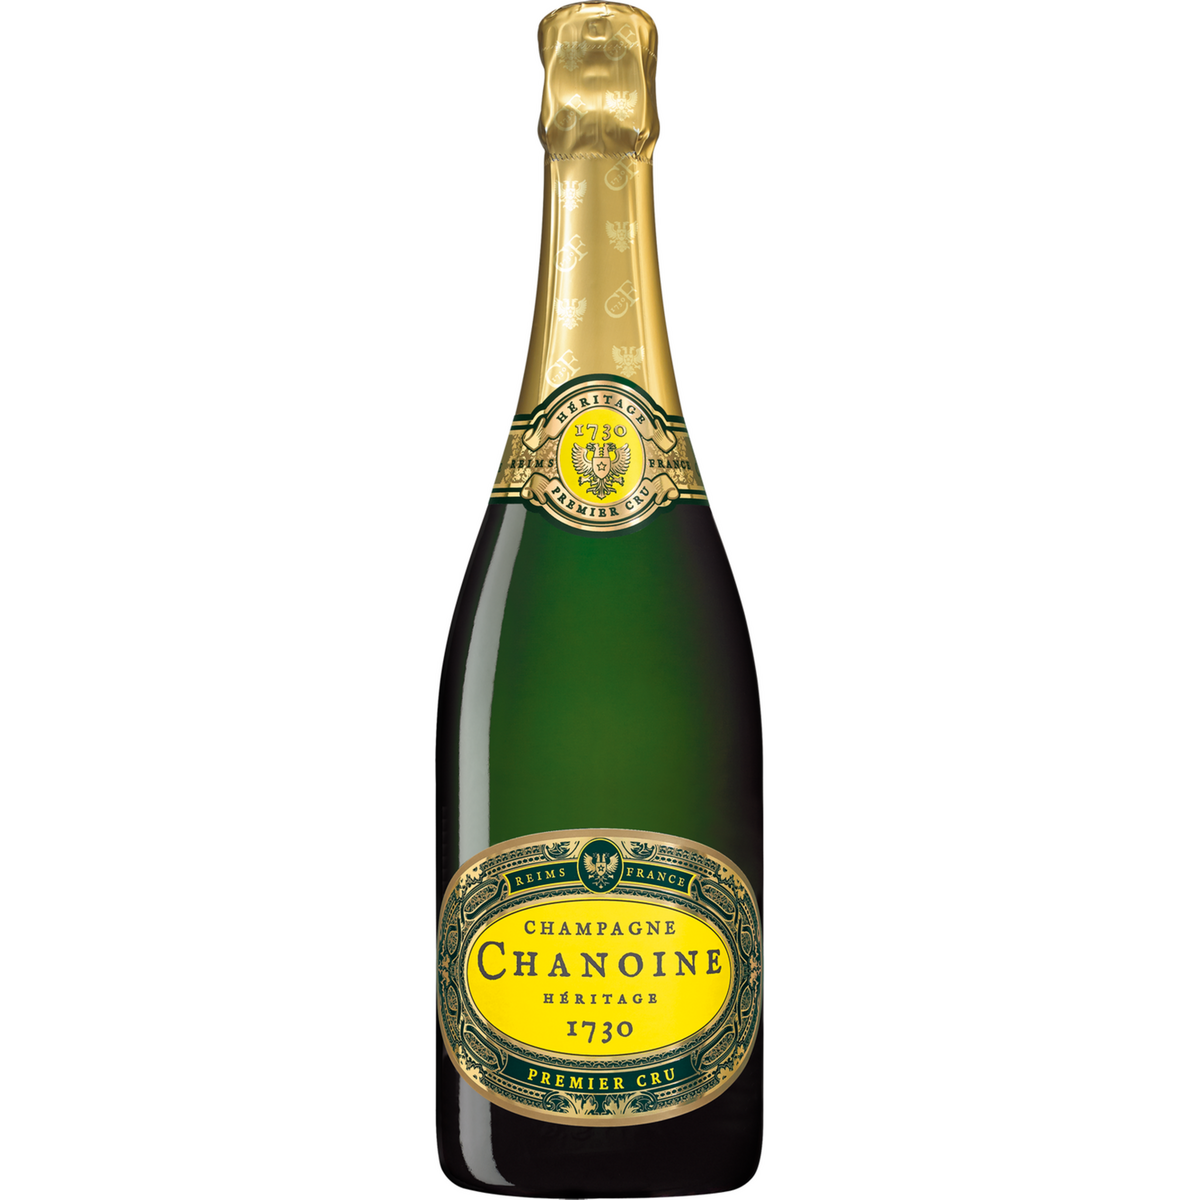 AOP Champagne Chanoine Heritage brut 75cl